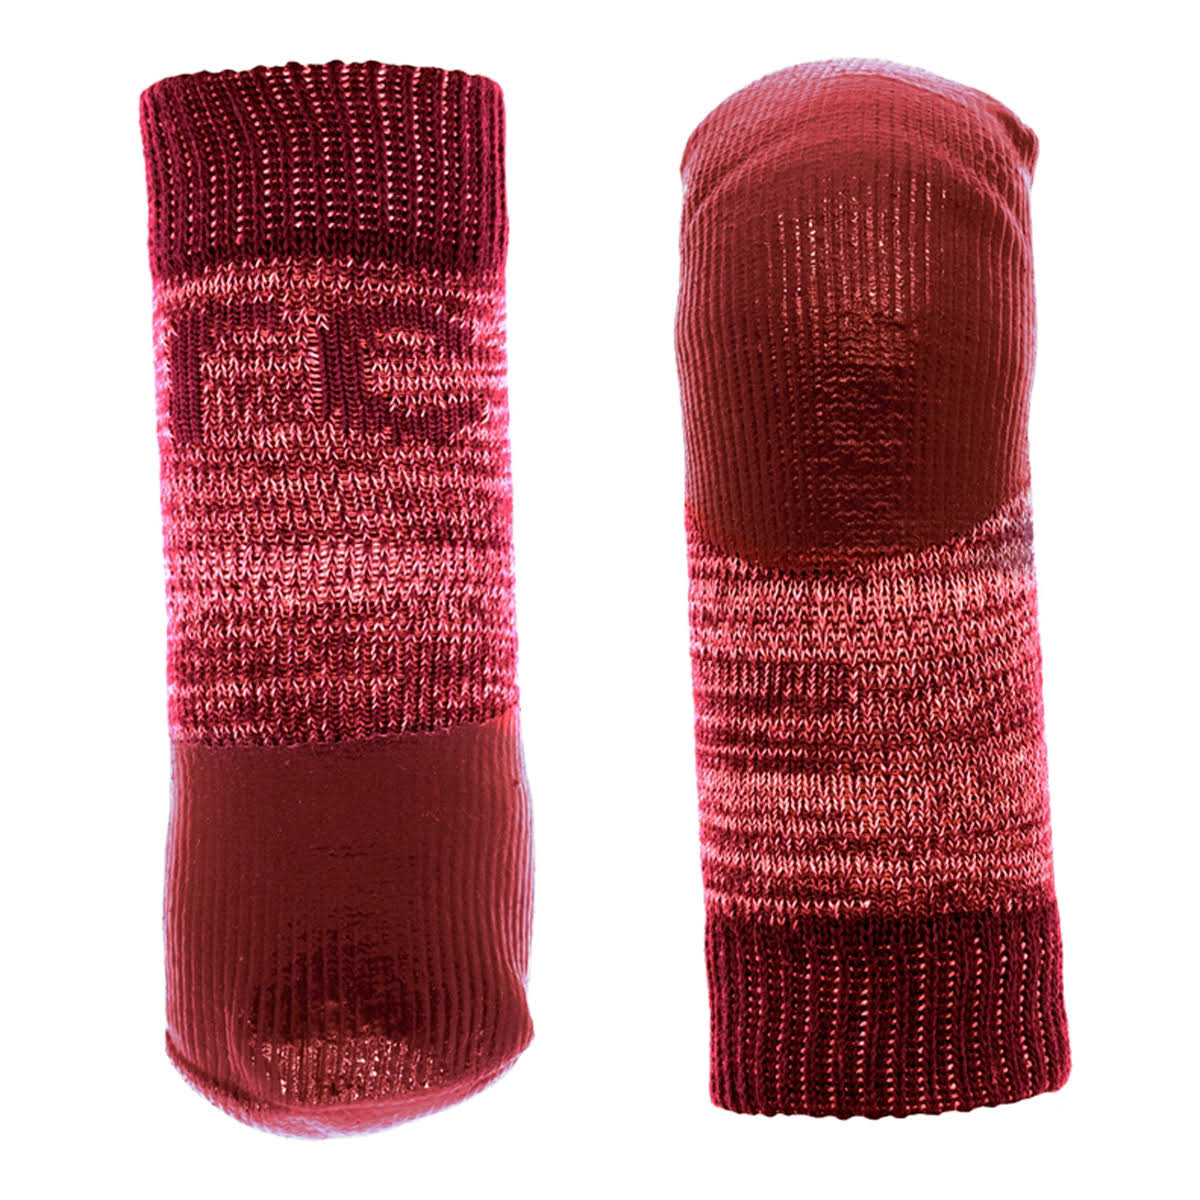 RC Pet Products Sport Pawks Paw Protection Dog Socks - Red Heather, X-Small